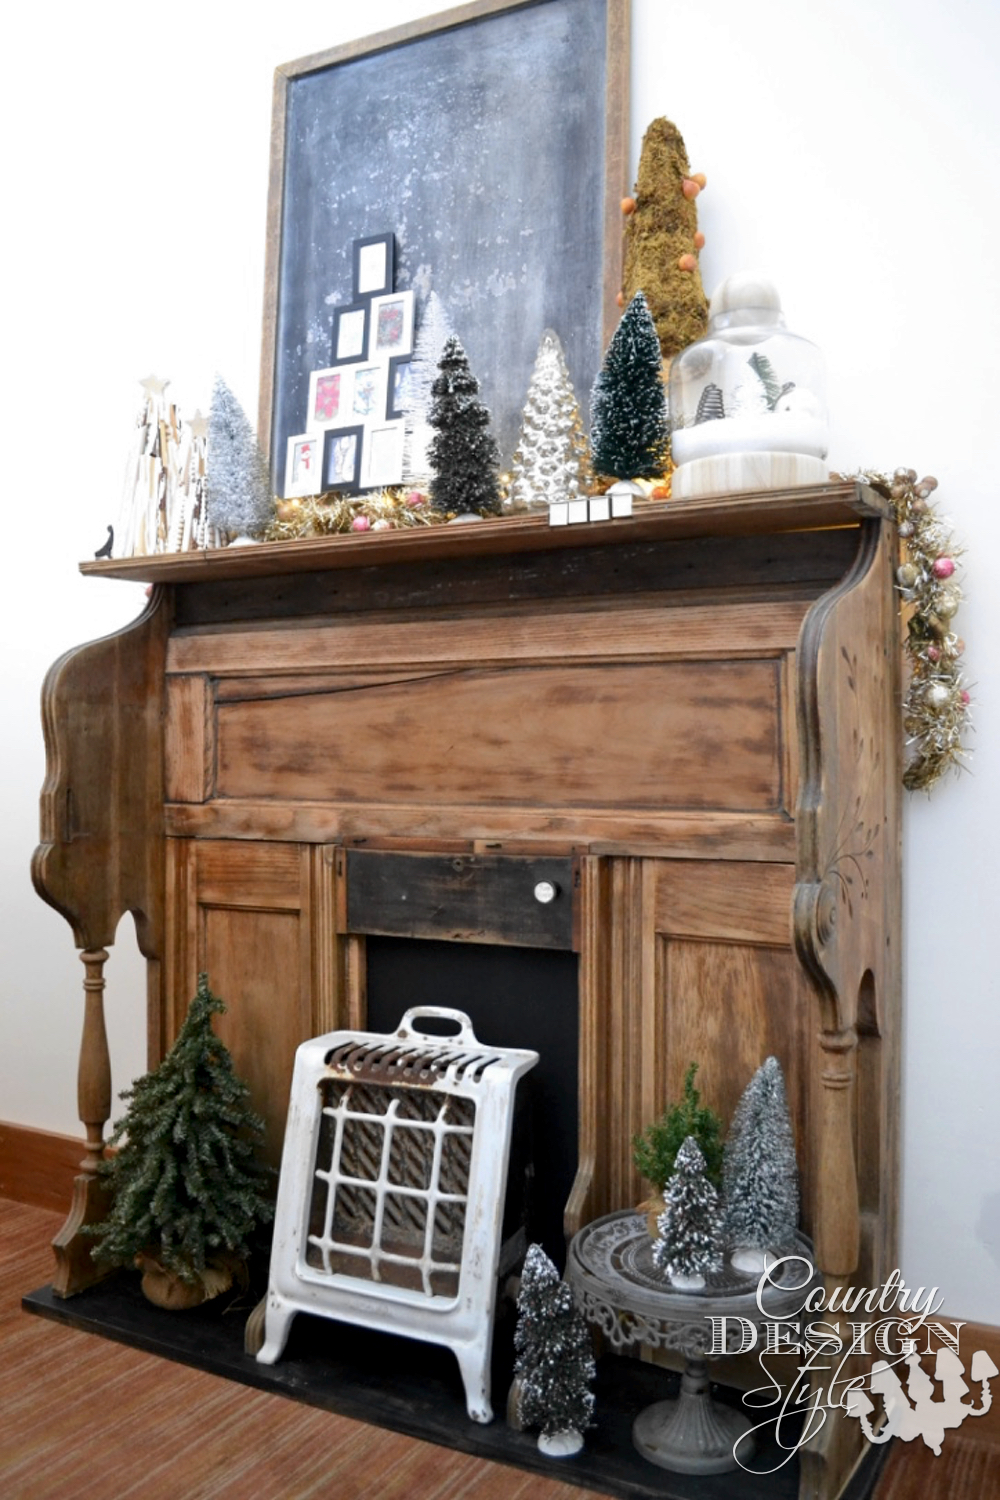 Charming Unique Fireplace Makeover in One Hour | Country Design Style | countrydesignstyle.com